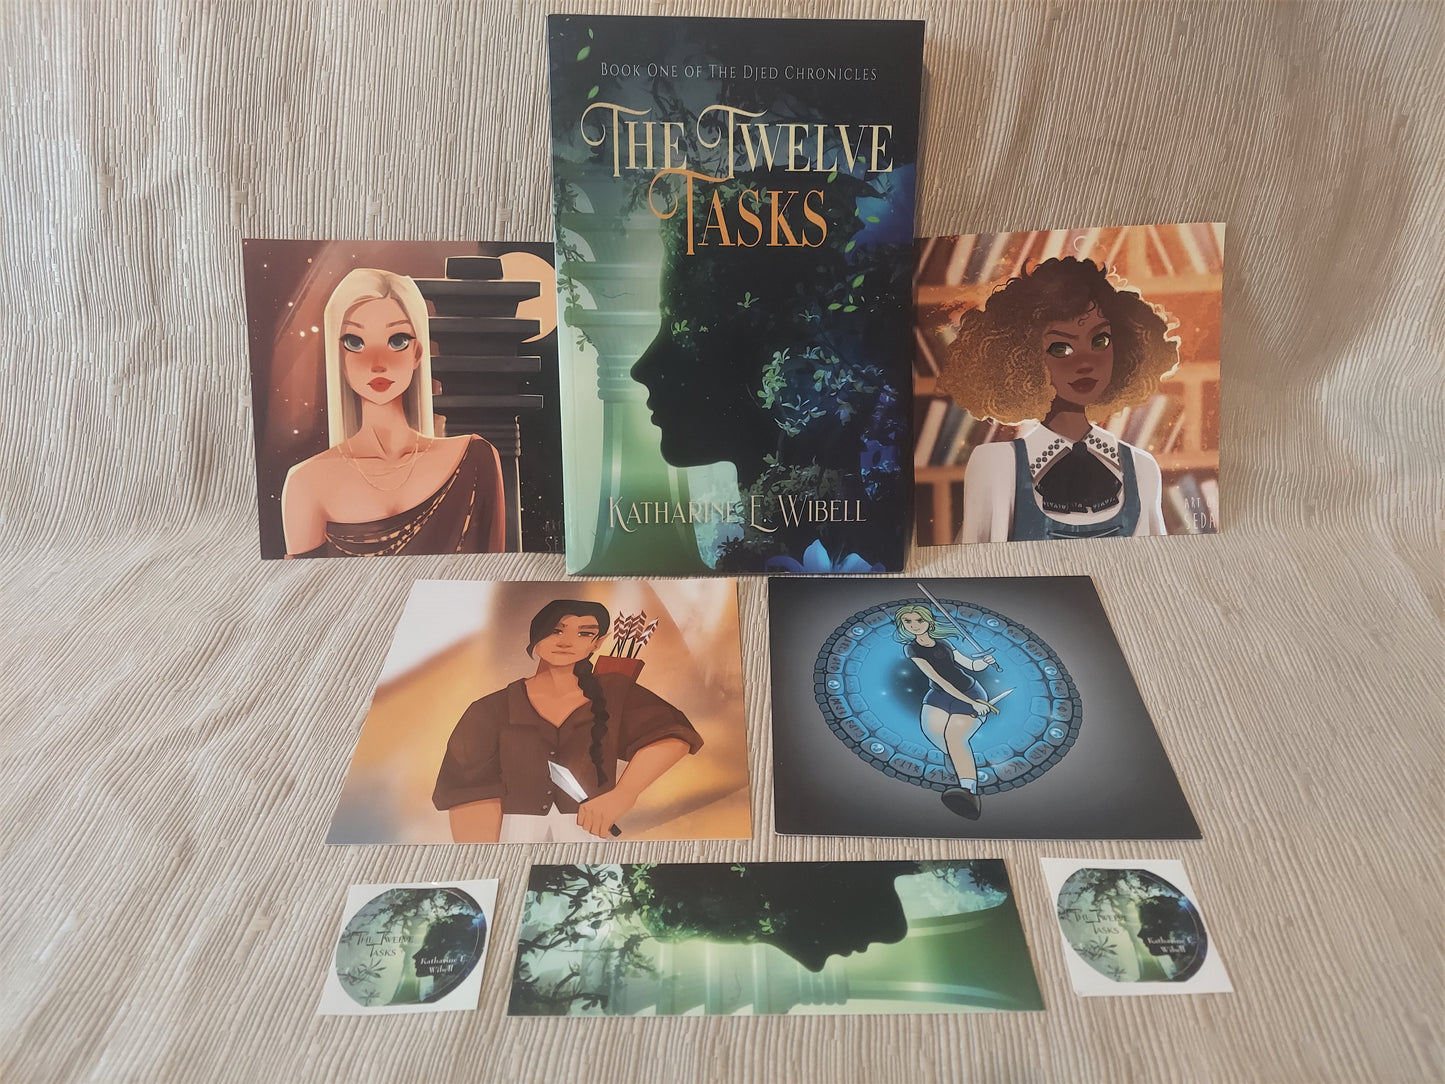 Art Book Box: The Twelve Task - Book One of The Djed Chronicles